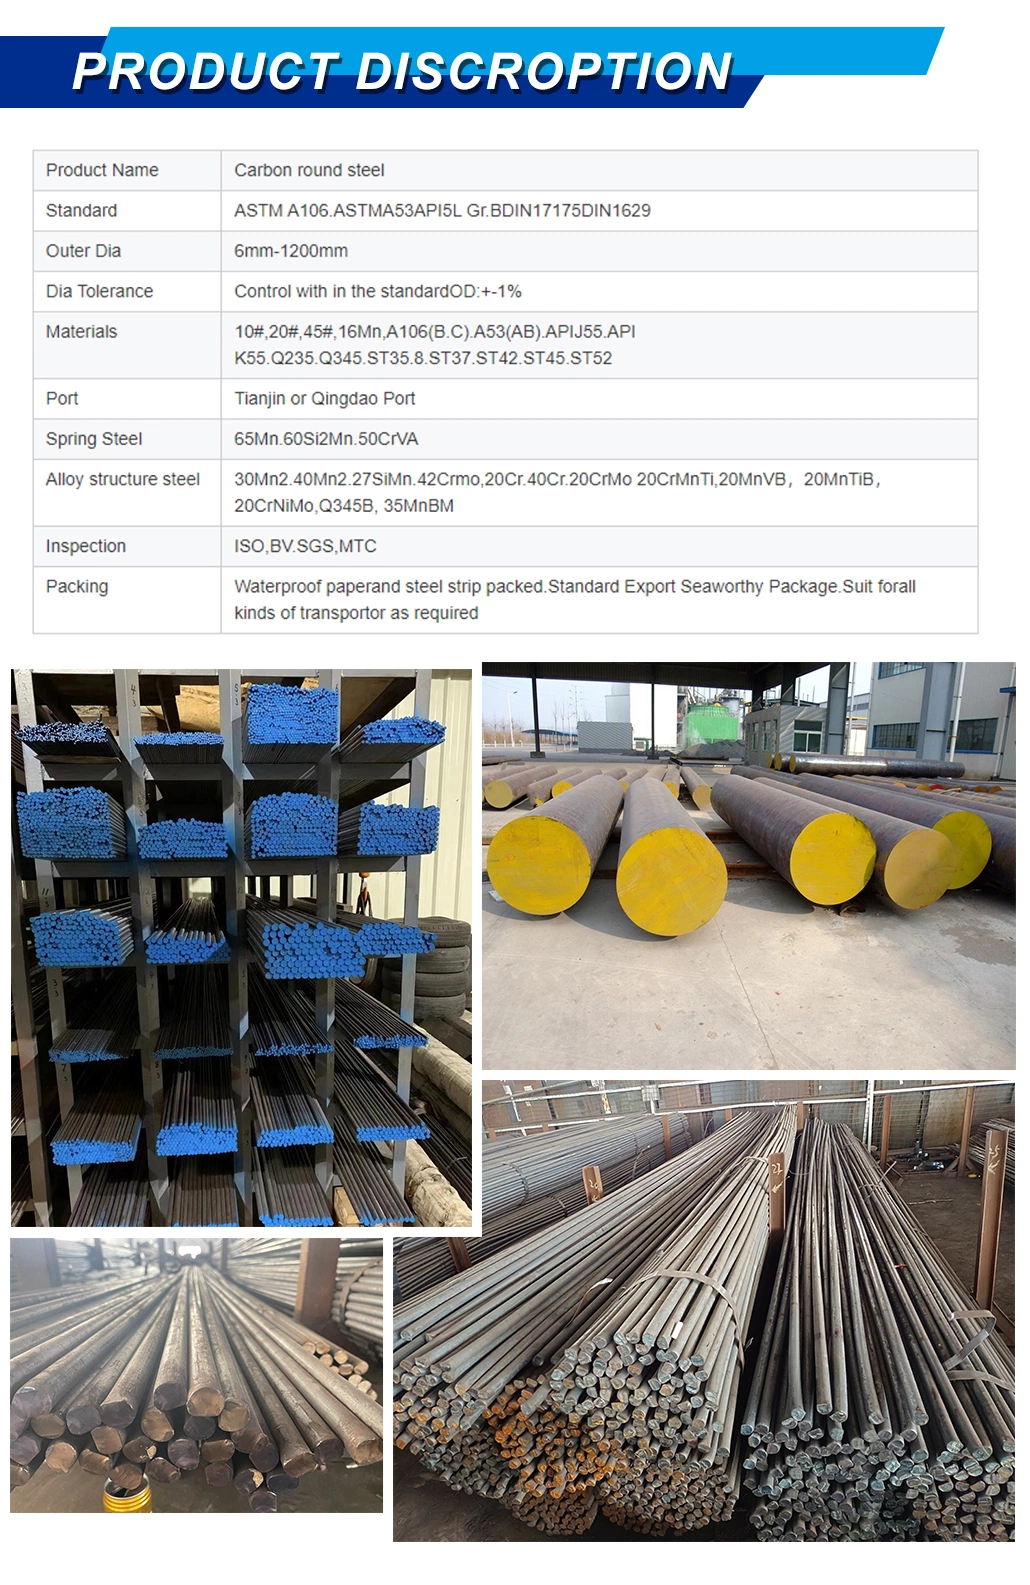 Chinese Factory Carbon Steel Round Bar 10mm Q235B for Sale